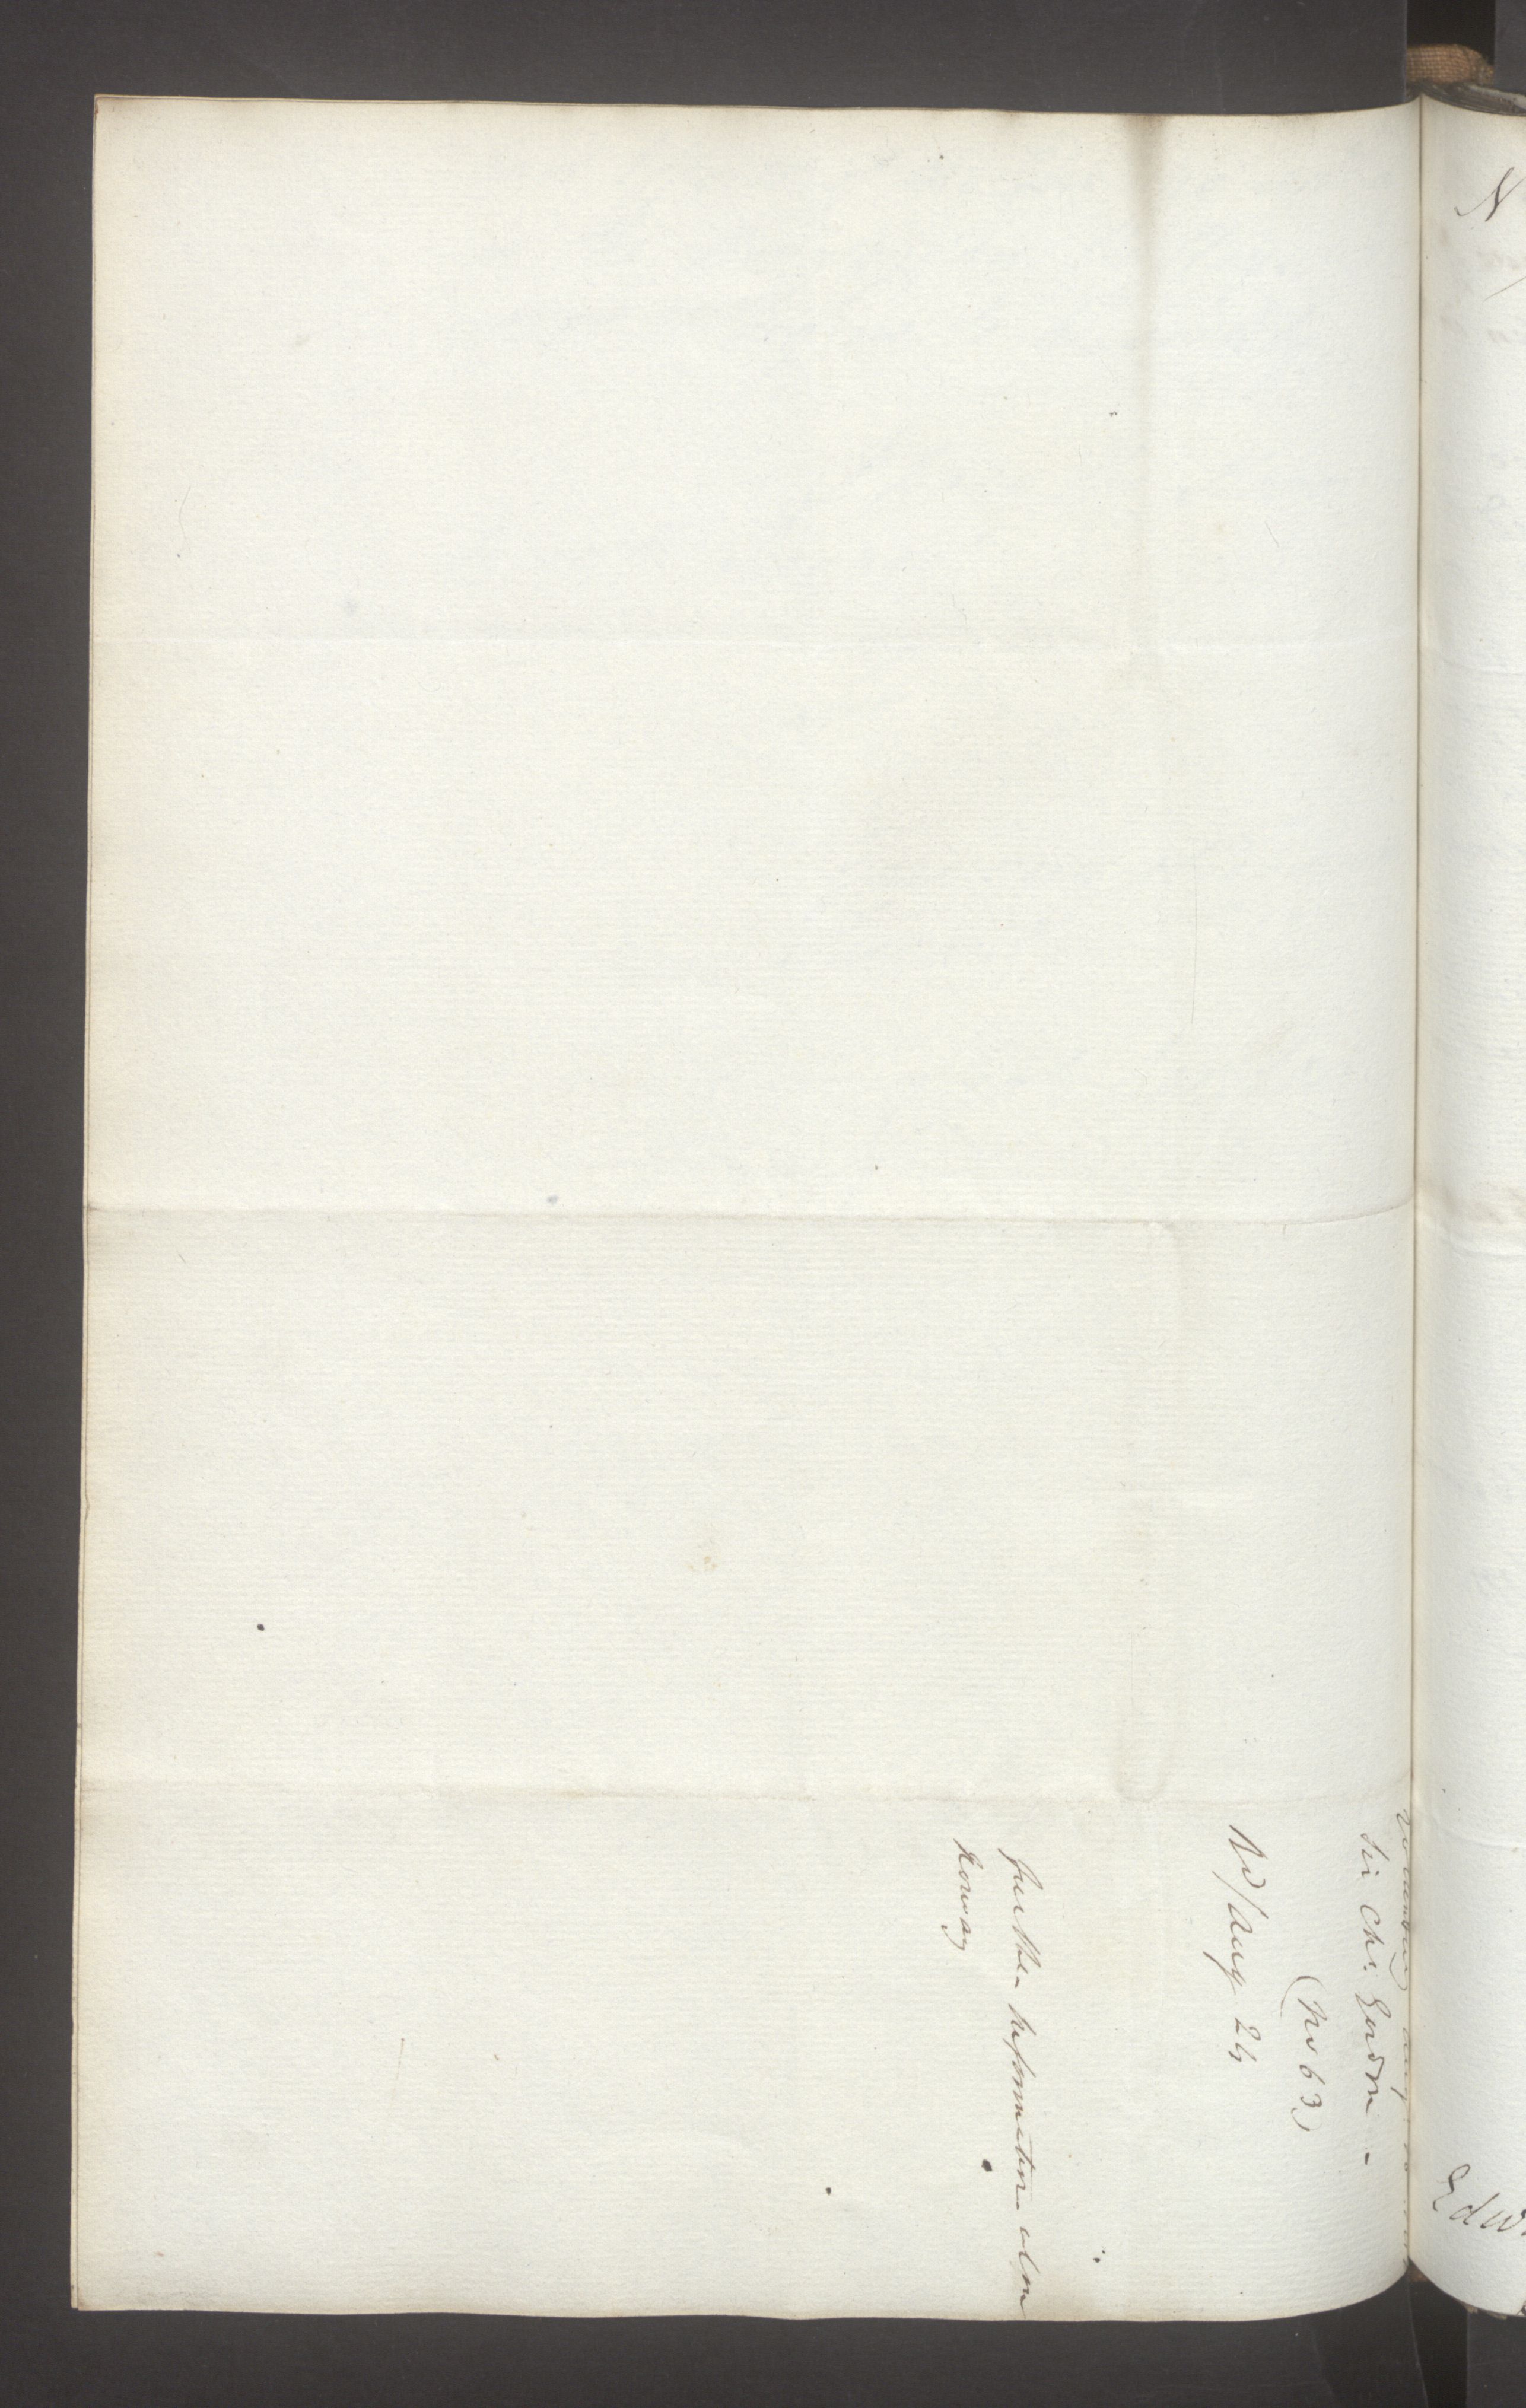 Foreign Office*, UKA/-/FO 38/16: Sir C. Gordon. Reports from Malmö, Jonkoping, and Helsingborg, 1814, s. 85